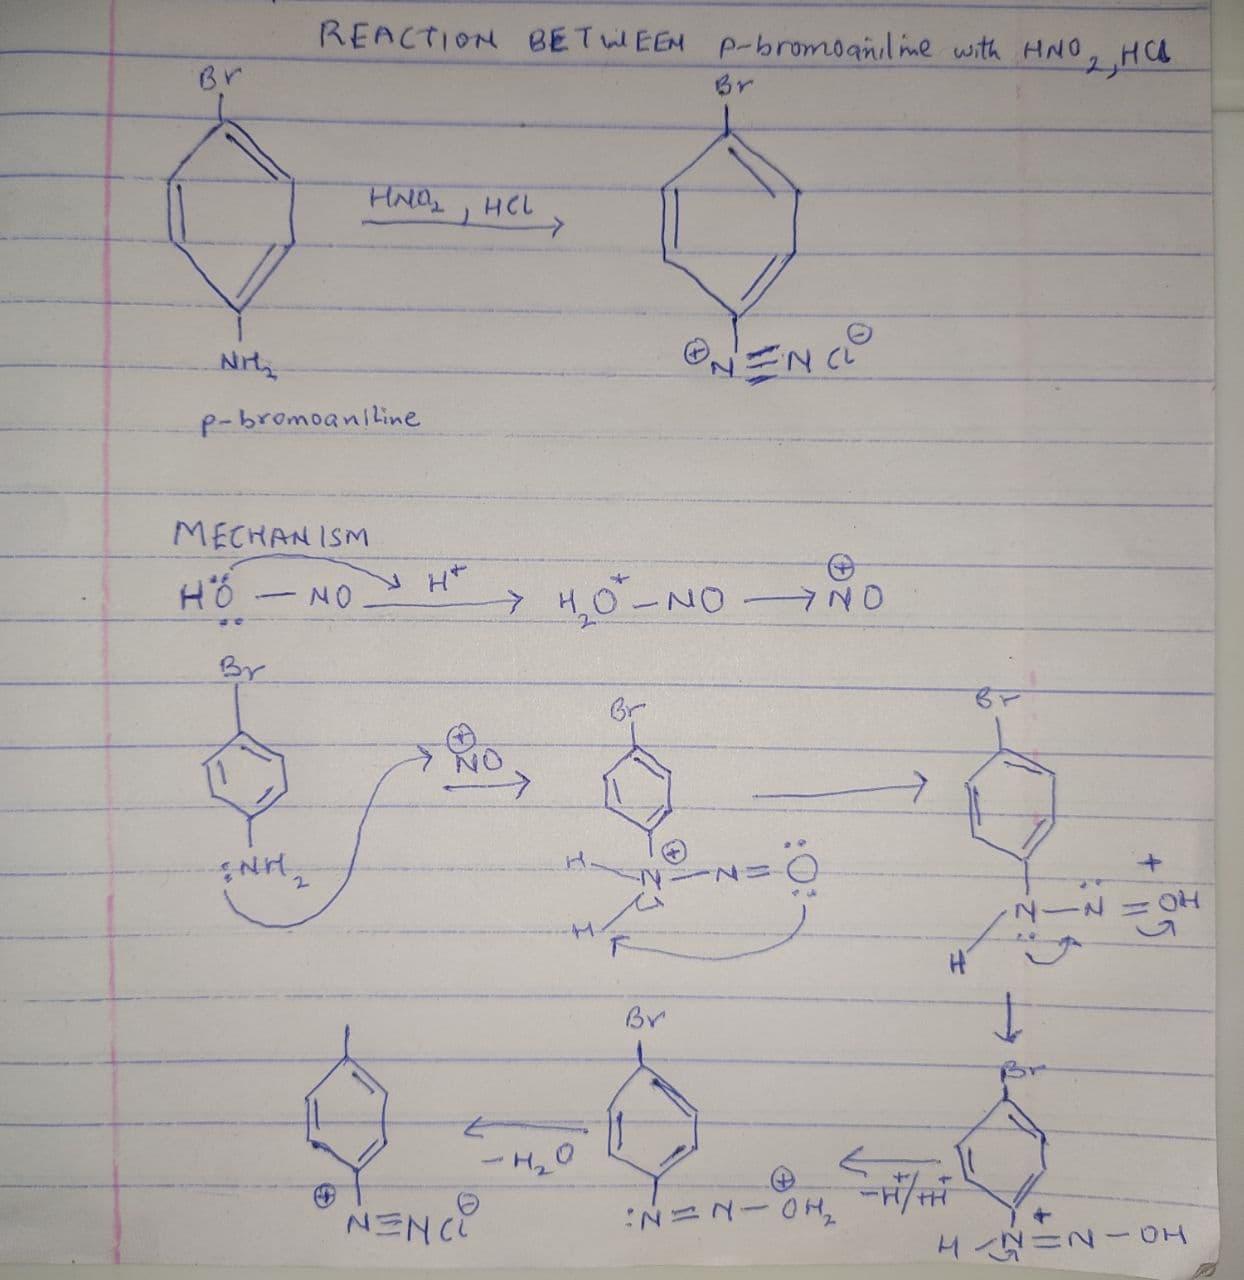 Draw The Major Organic Product(s) Of The Reaction Of P-bromoaniline With HNO2, HCl.